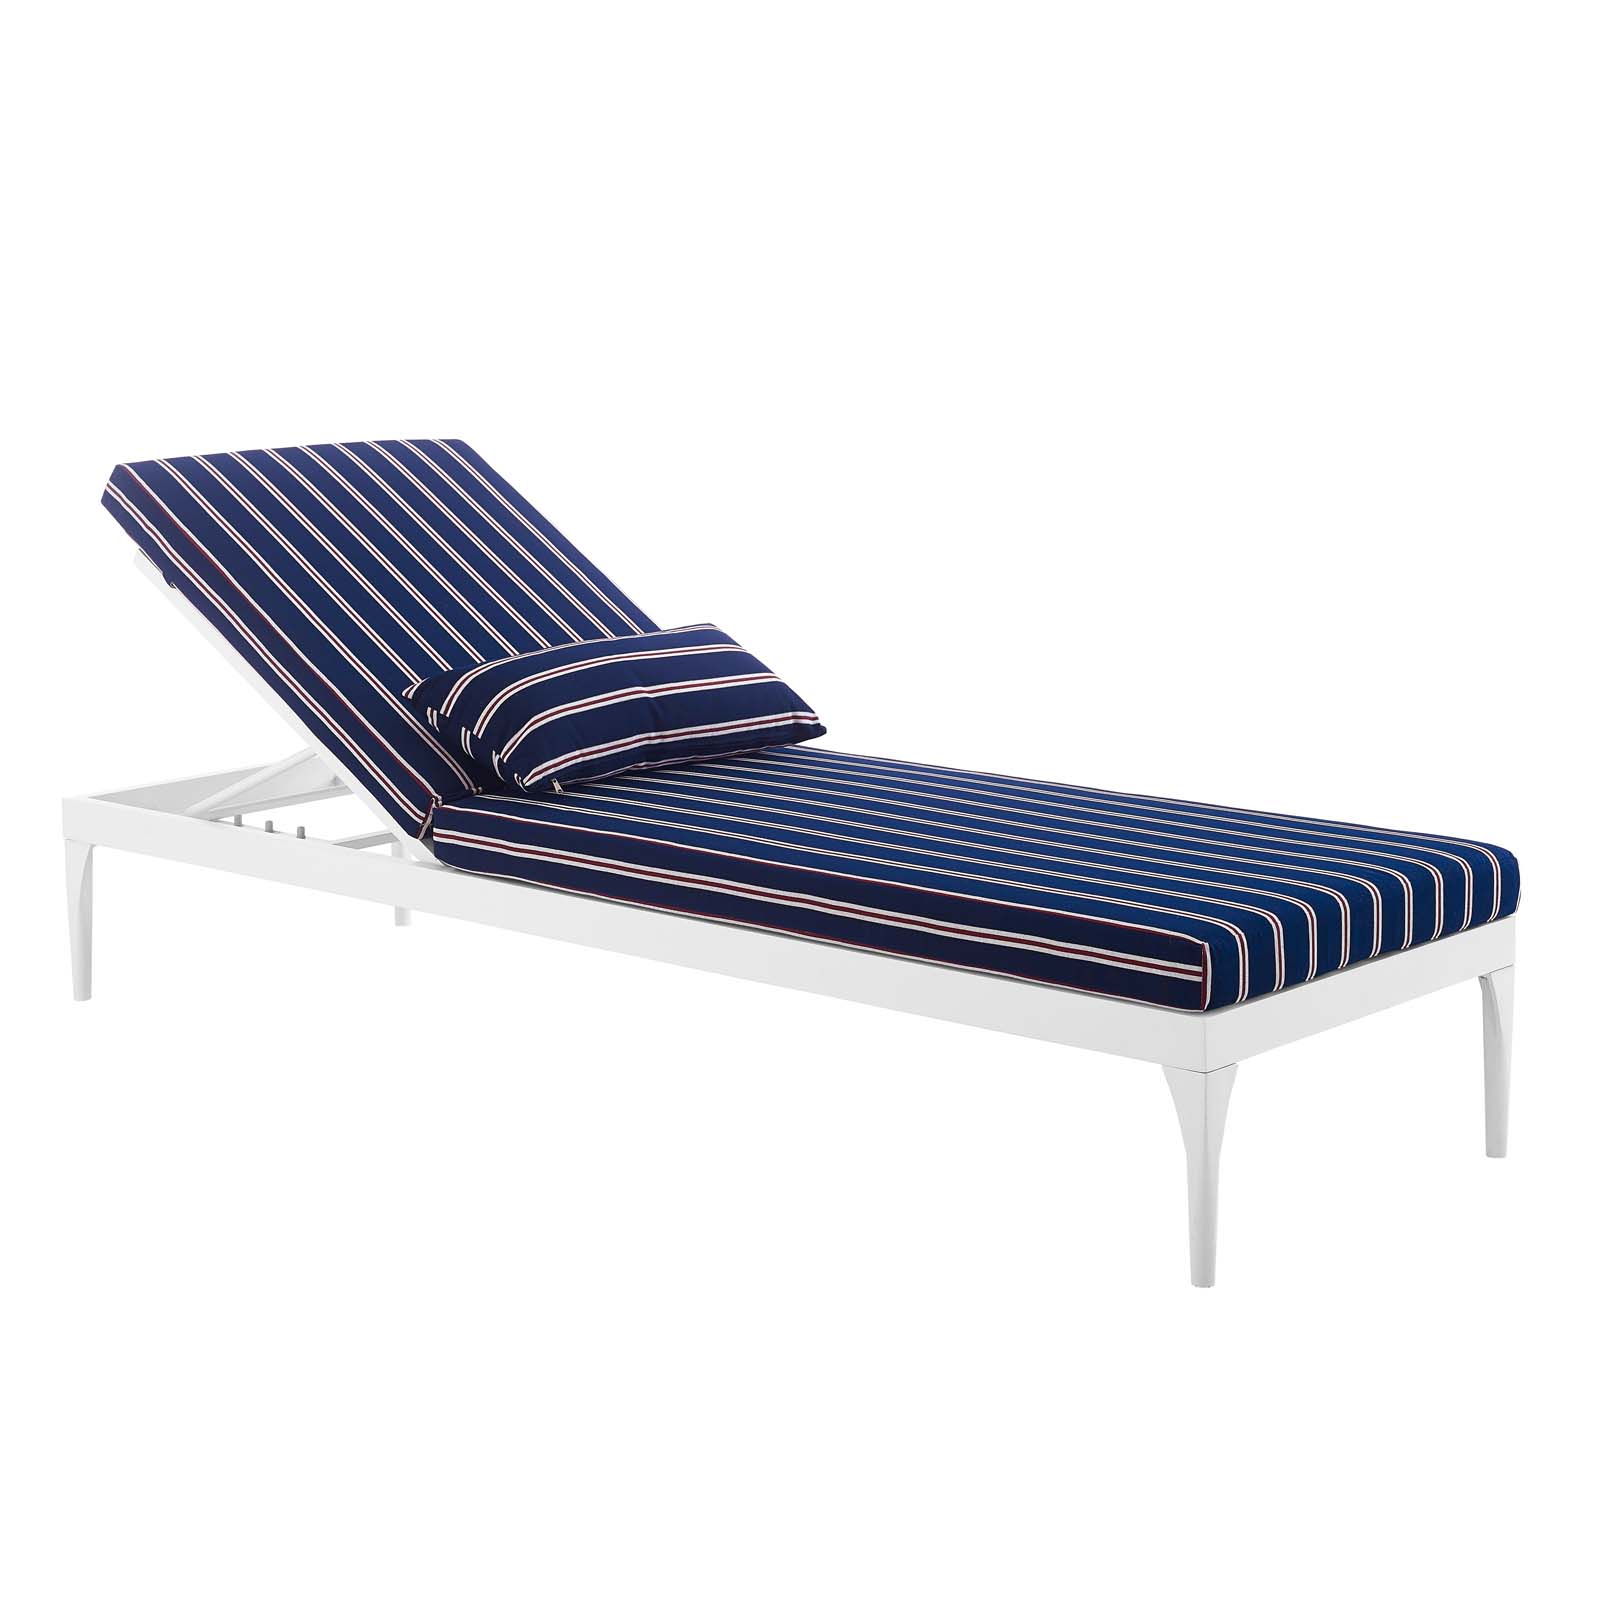 Modern Contemporary Urban Design Outdoor Patio Balcony Garden Furniture Lounge Chair Chaise, Fabric Metal Steel, White Navy - image 4 of 7